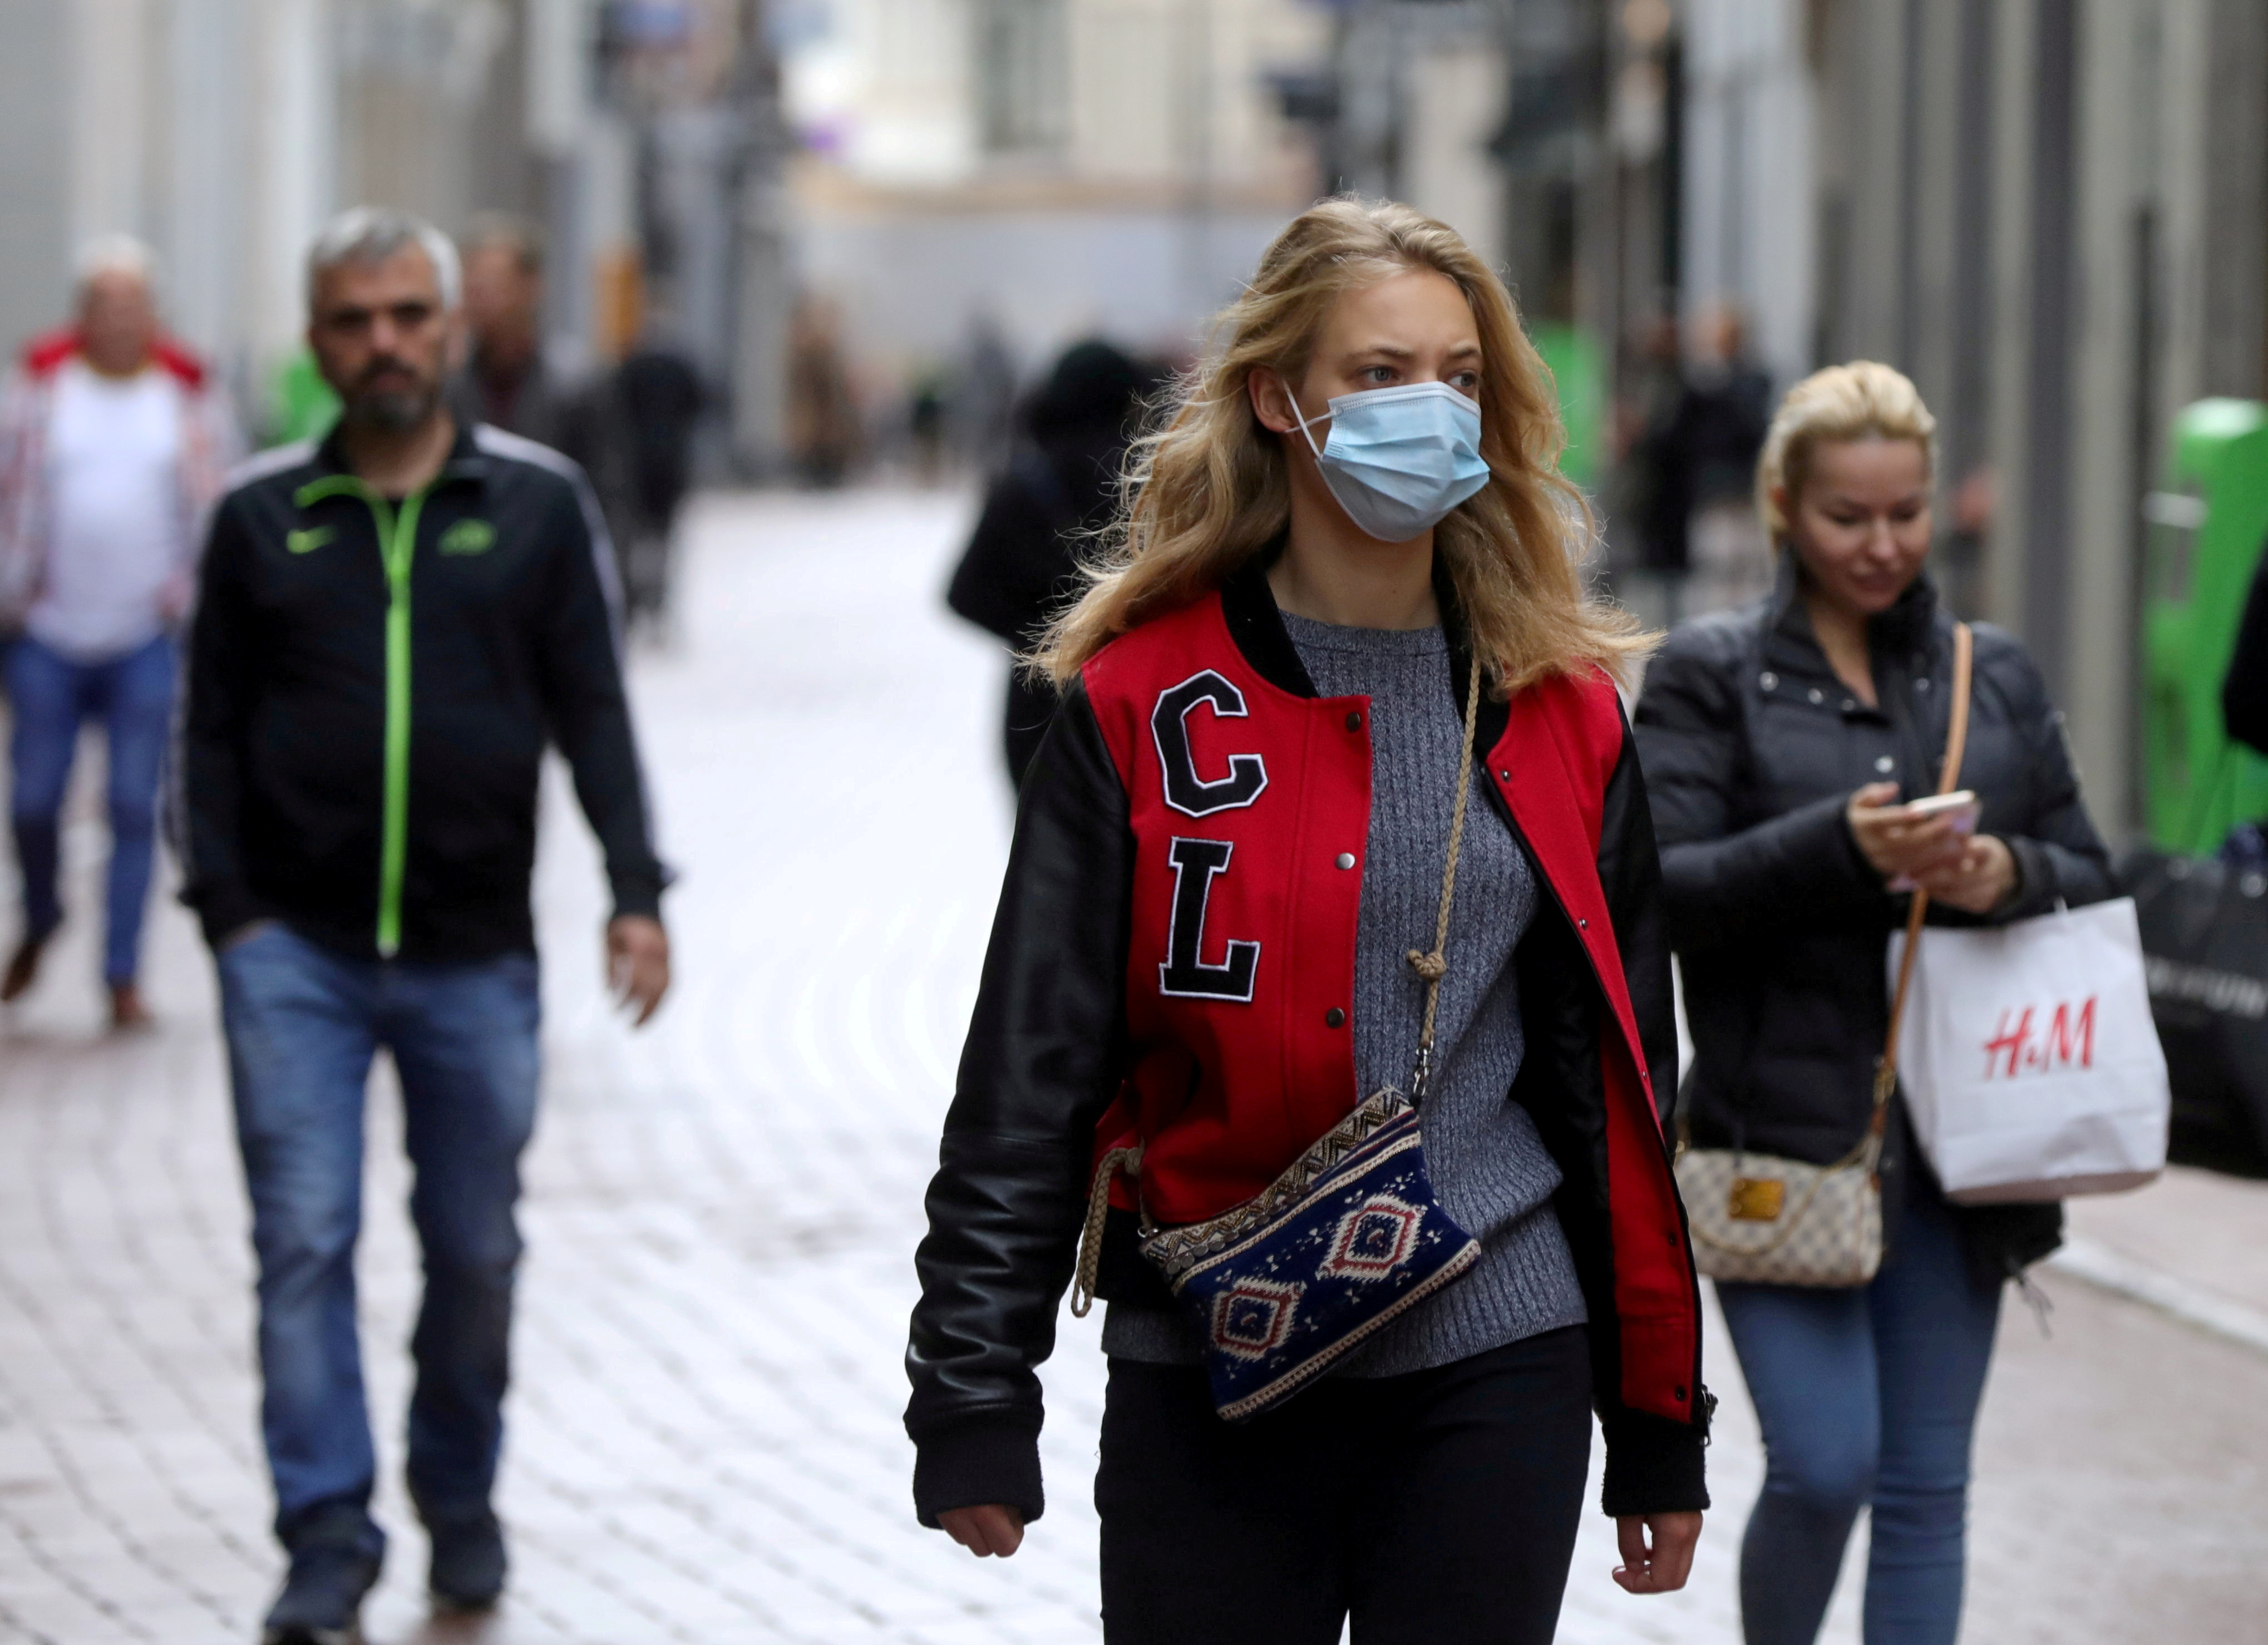 People with and without protective masks walk on the street while shopping as the spread of coronavirus disease (COVID-19) continues in Amsterdam, Netherlands October 7, 2020. REUTERS/Eva Plevier